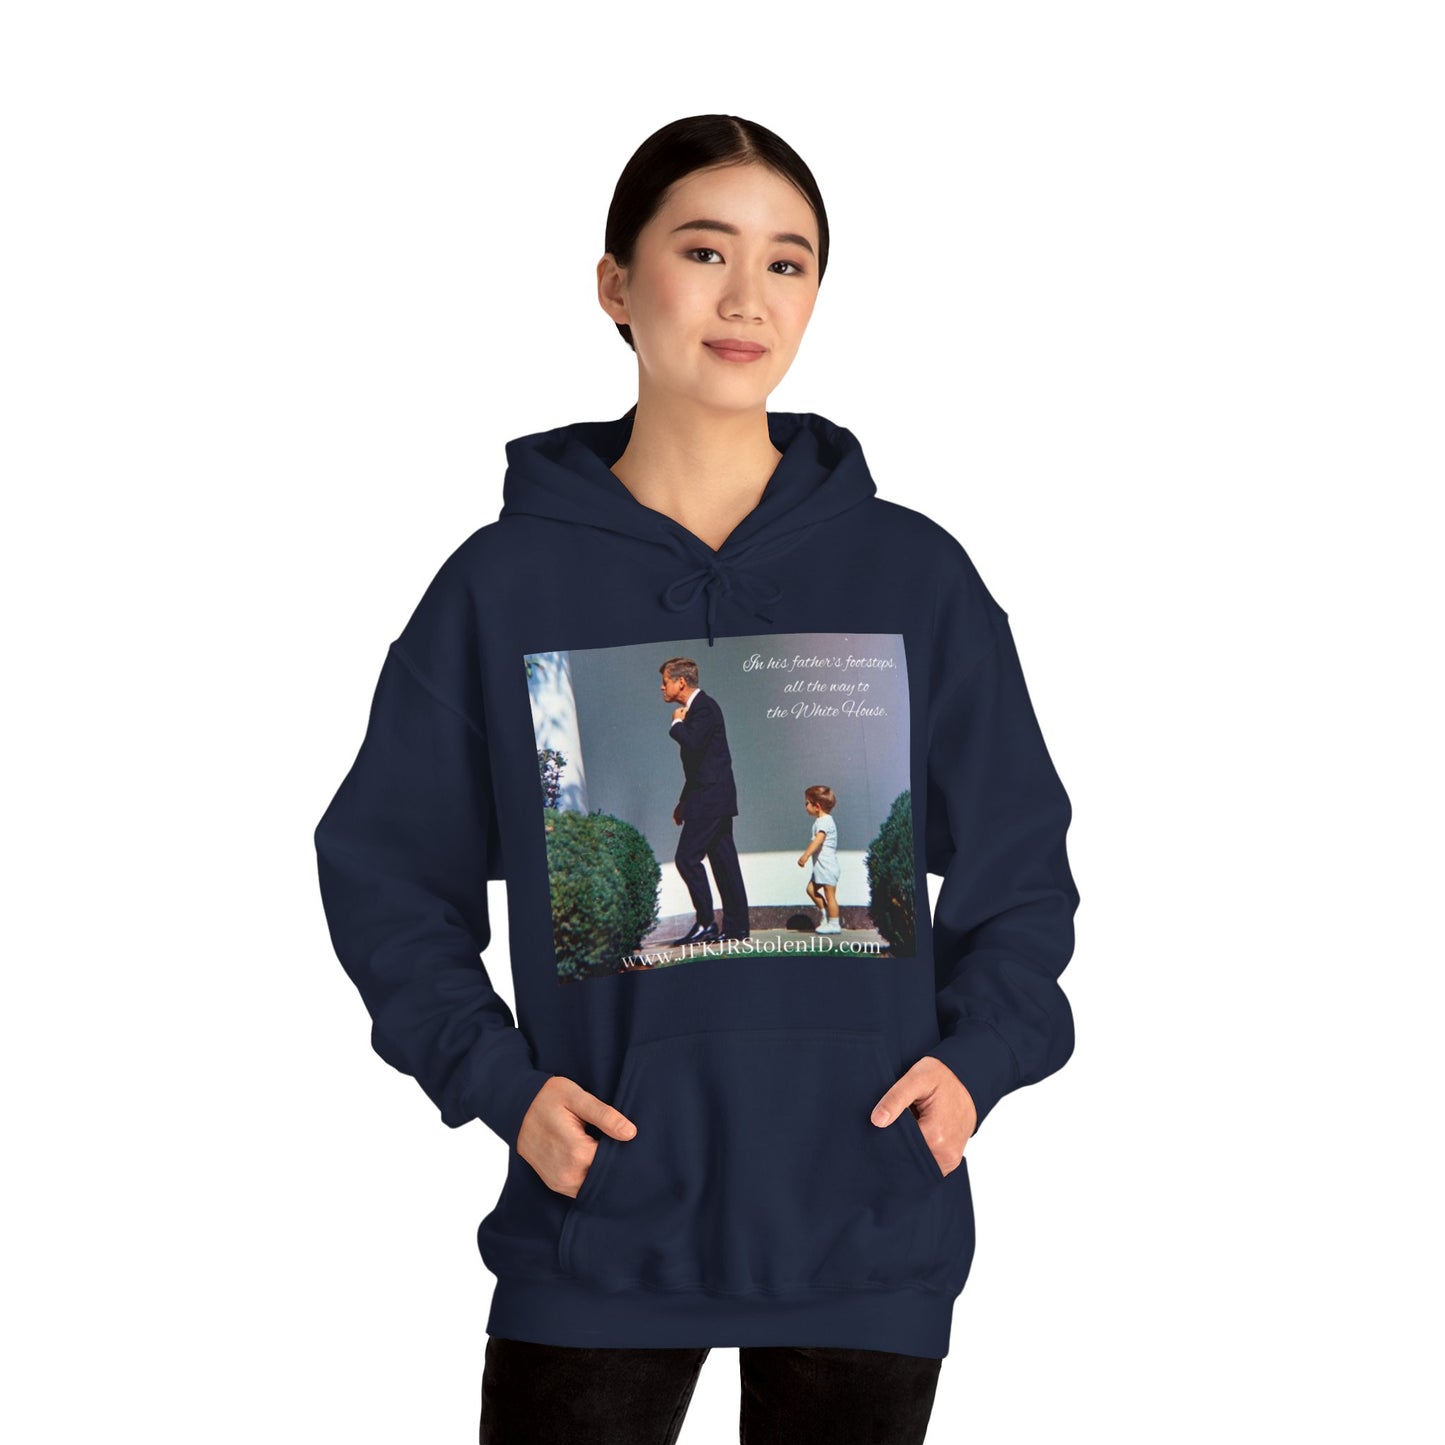 In His Father's Steps Hooded Sweatshirt